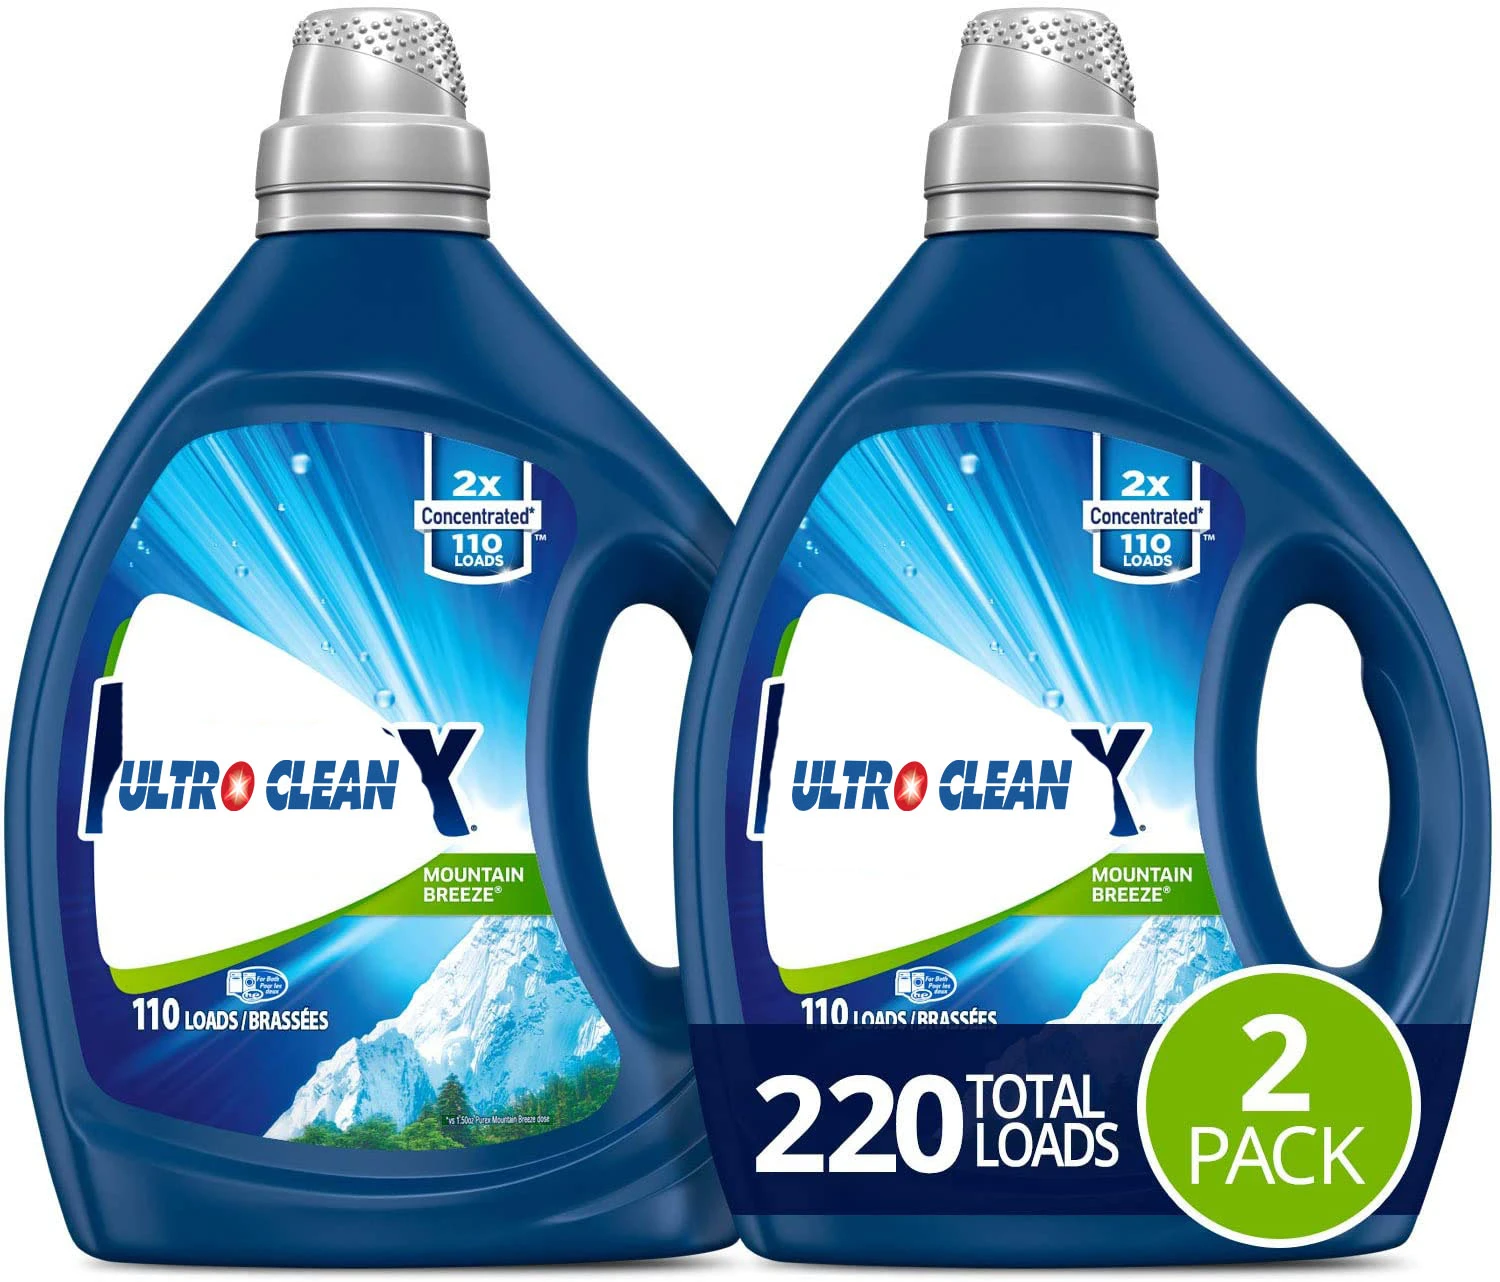 Household Washing Affordable To Carry Bacteriostatic Laundry Detergent